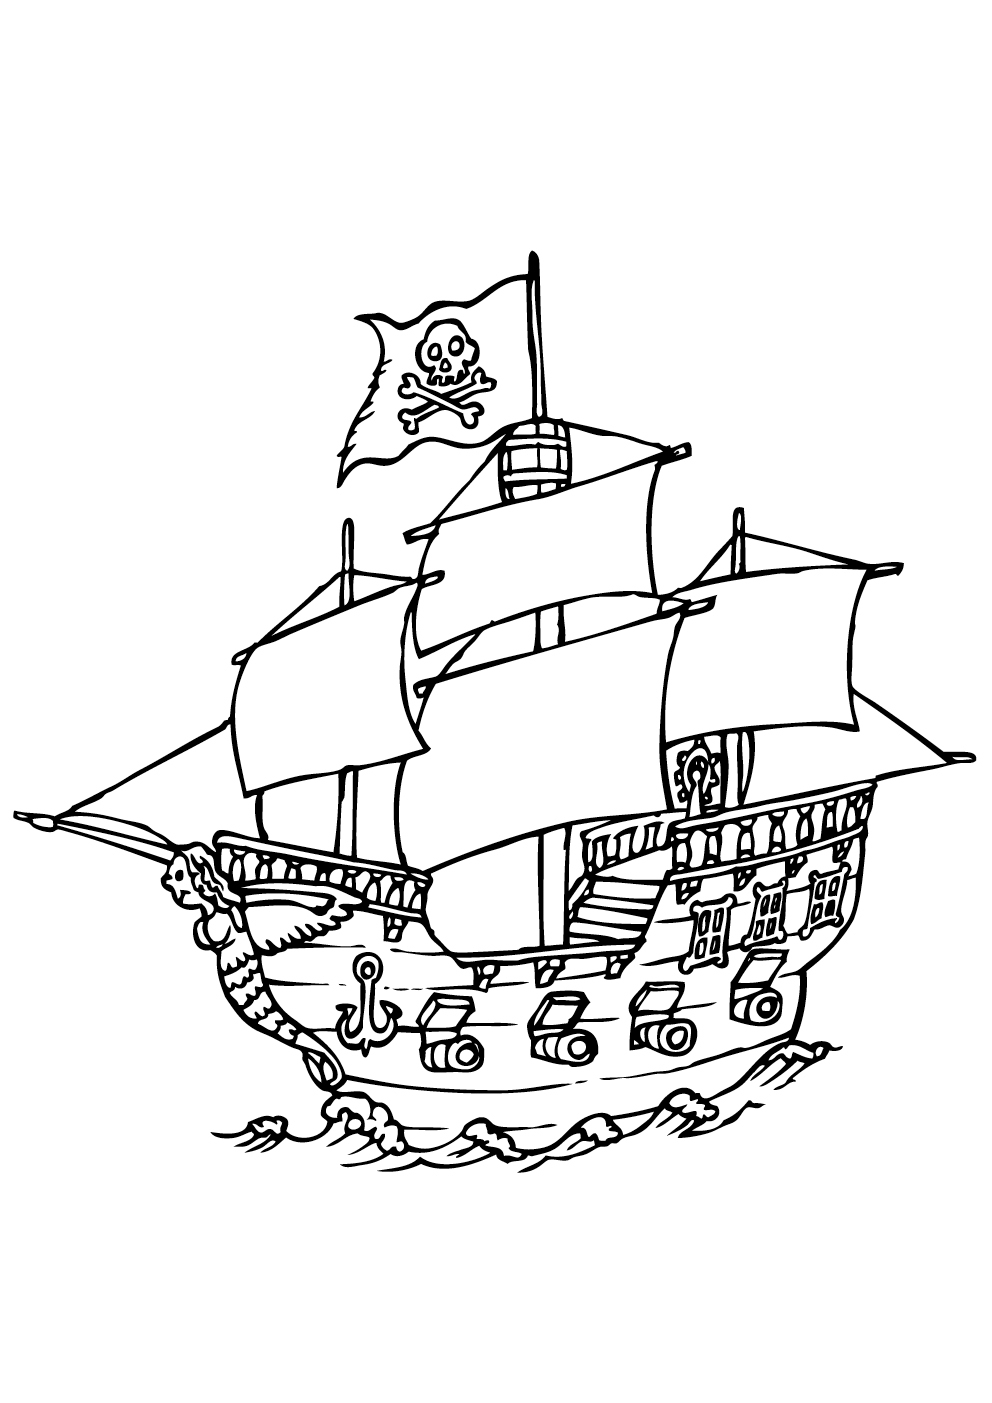 Pirate big boat  Pirates Coloring pages for kids to print & color